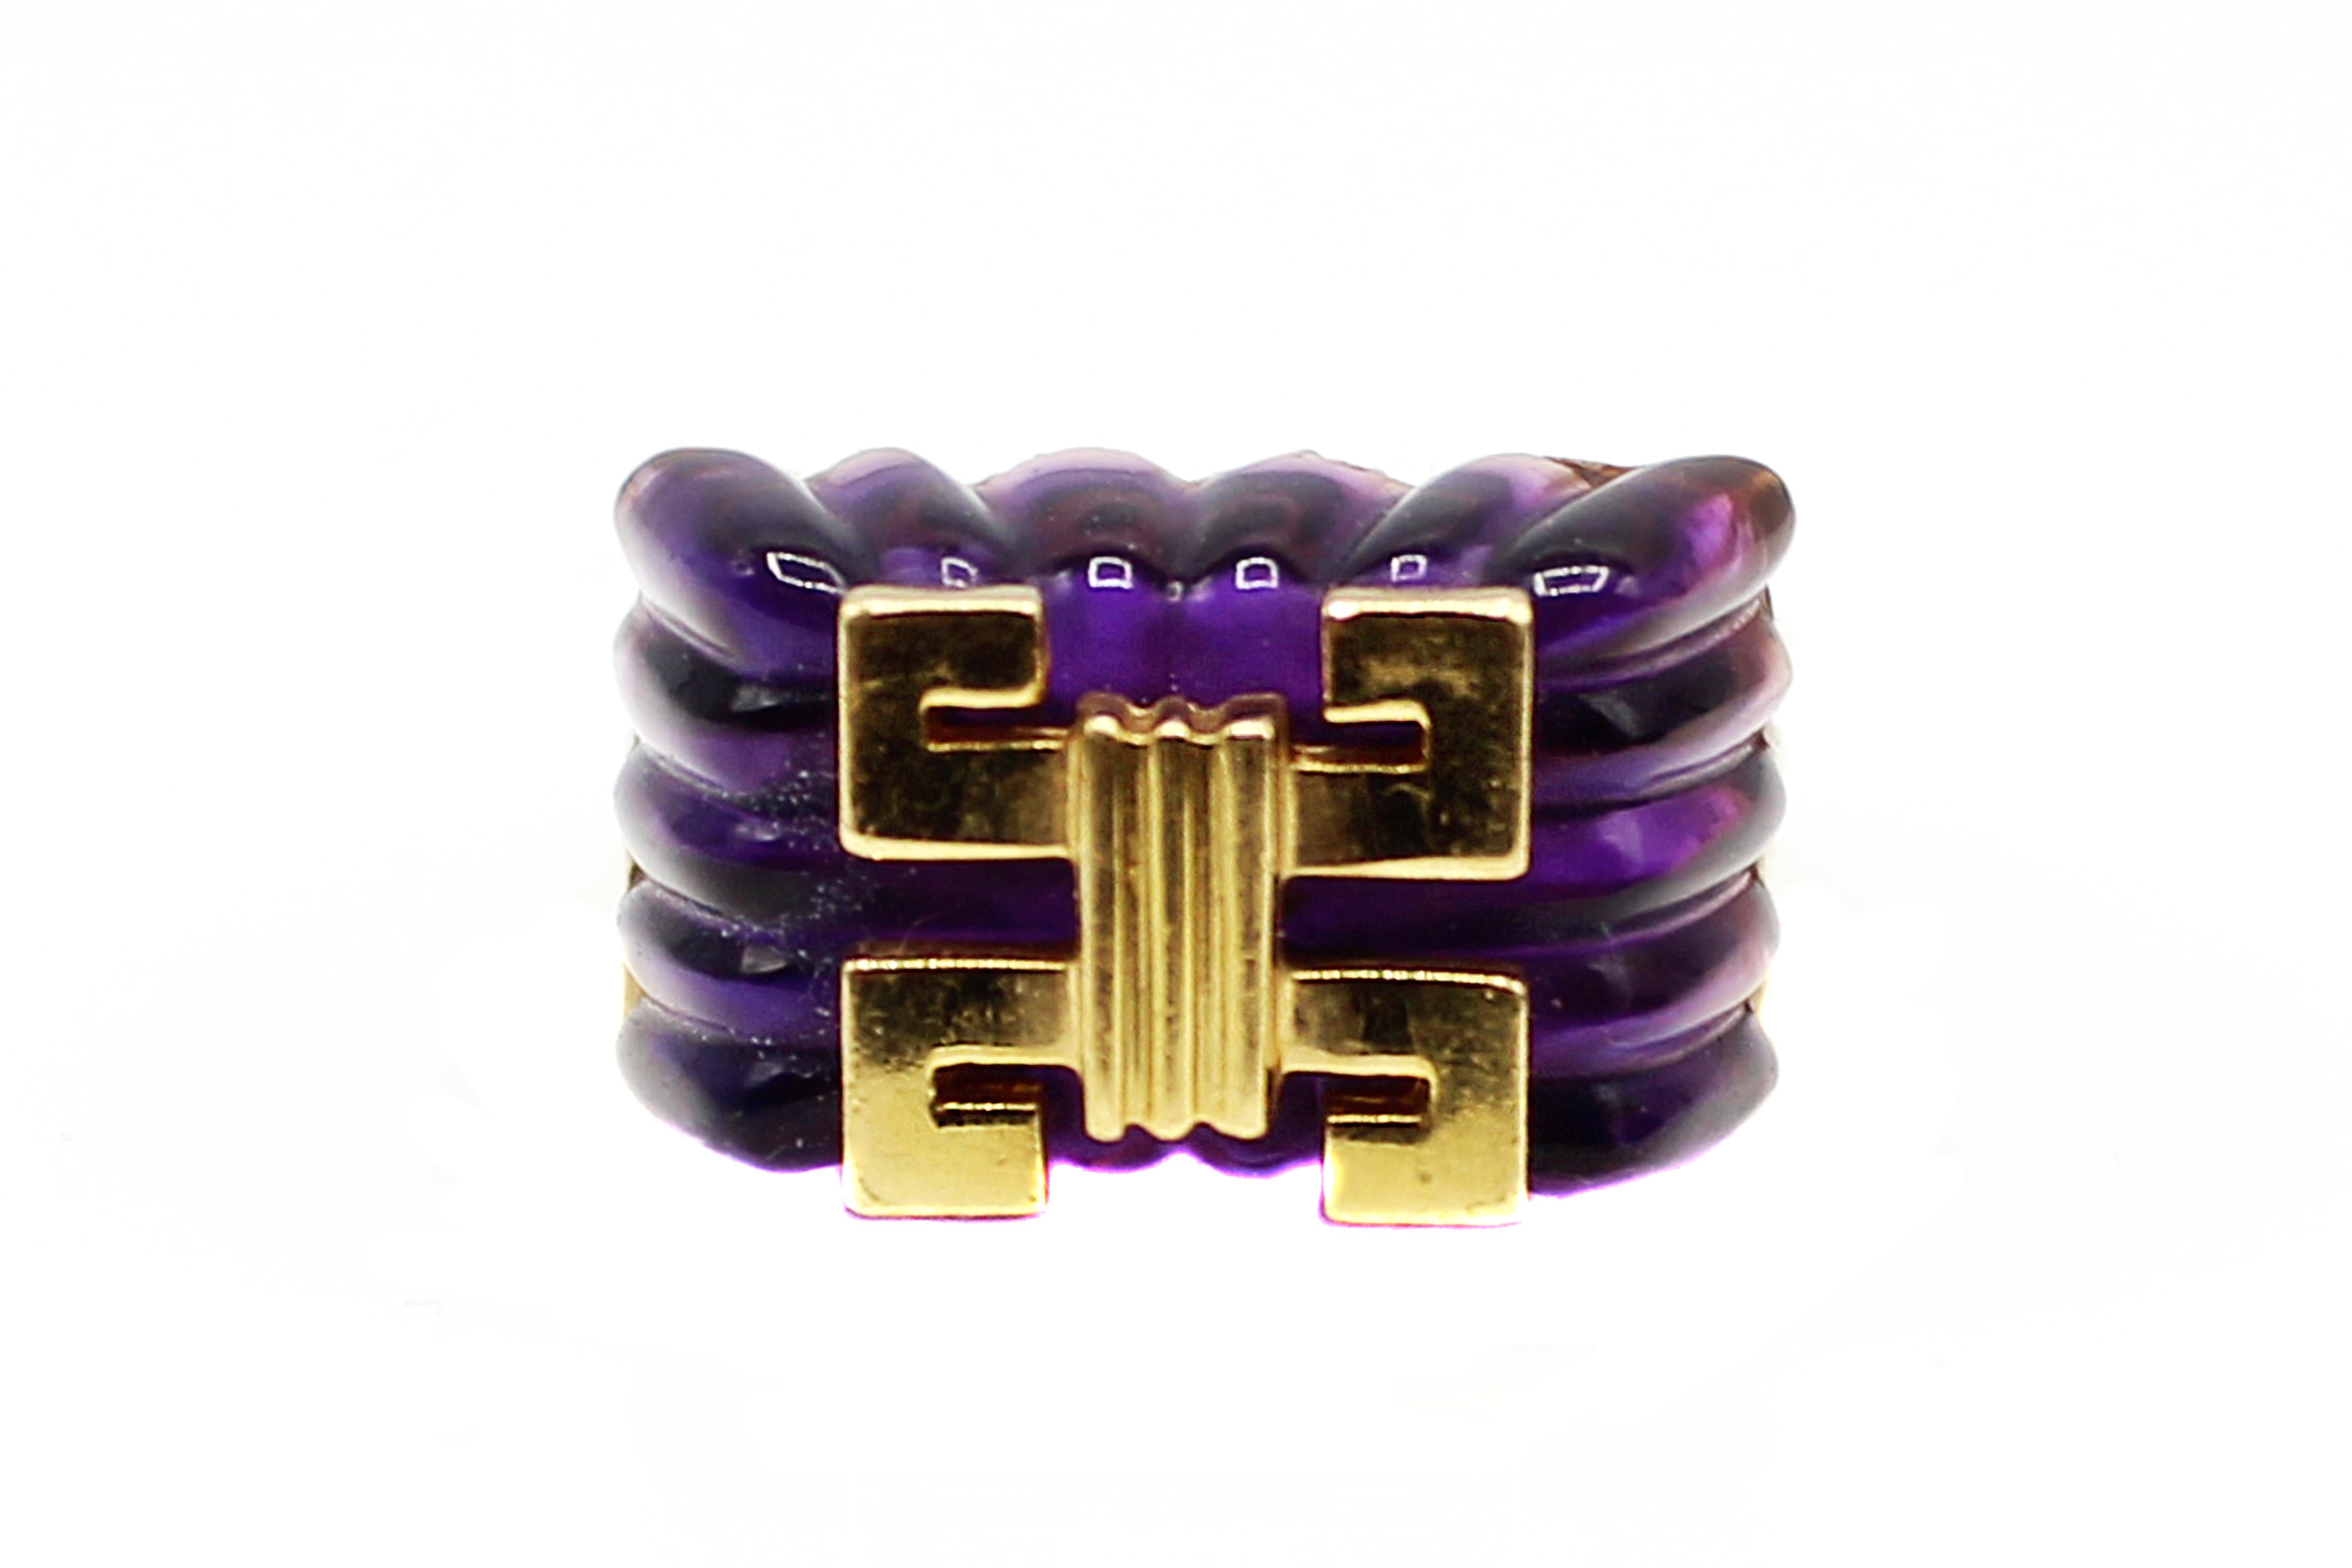 Bold and well handcrafted ring from the 1980s, showcases a deep violet carved Amethyst, accented with yellow gold geometric design elements. Amethysts with this kind of deep purple color saturation were mostly mined in Siberia. The amazing design